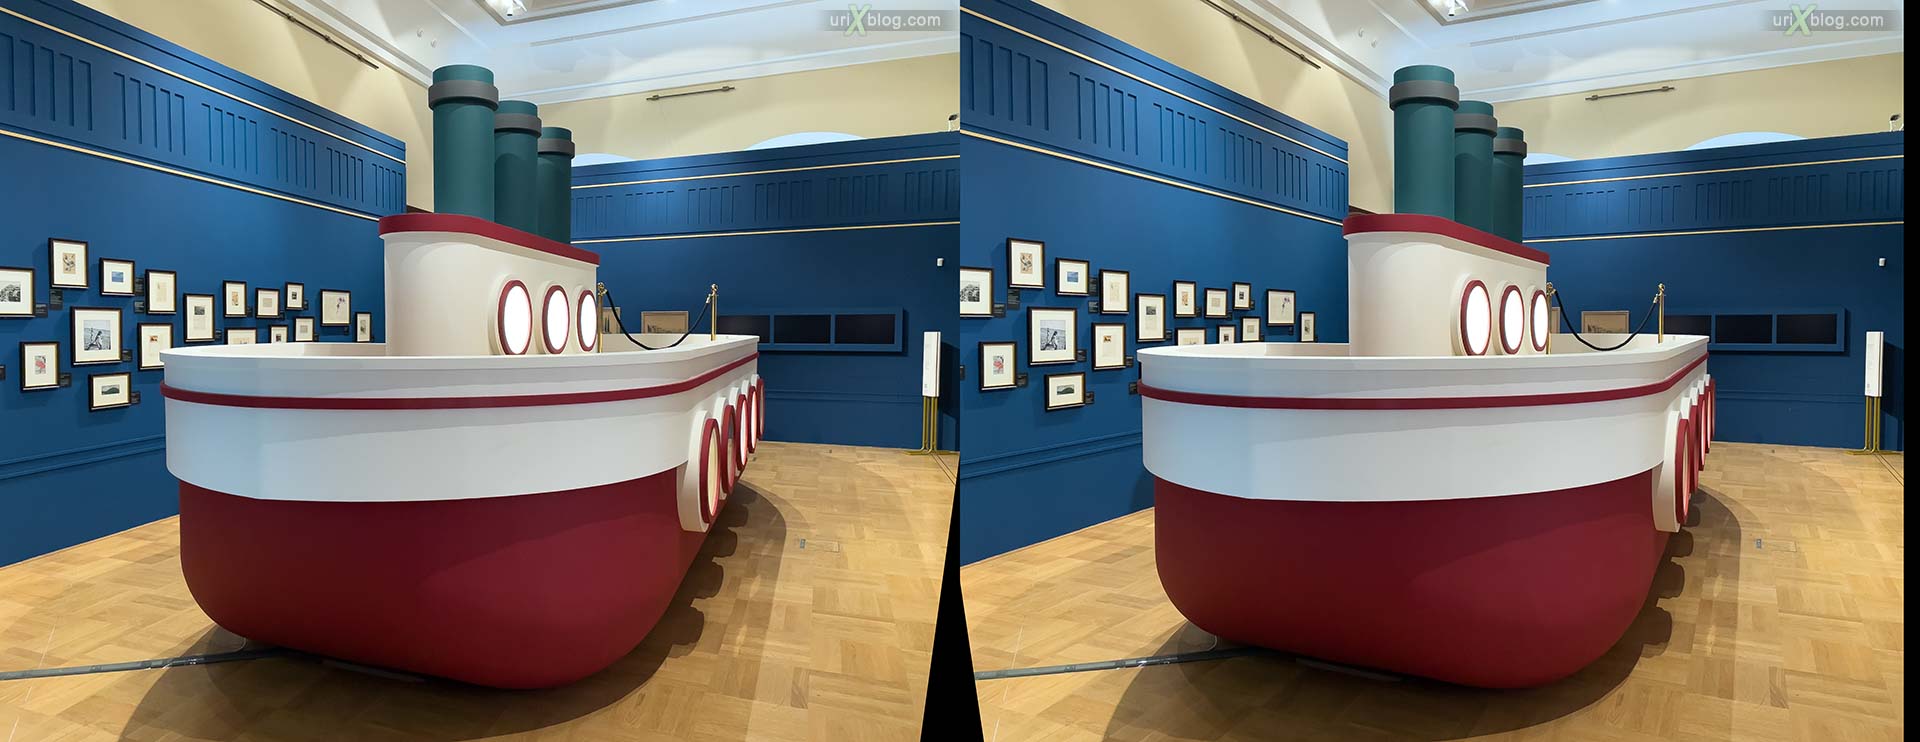 Tsaritsyno, museum, exhibbition, boat, ship, Moscow, Russia, 3D, stereo pair, cross-eyed, crossview, cross view stereo pair, stereoscopic